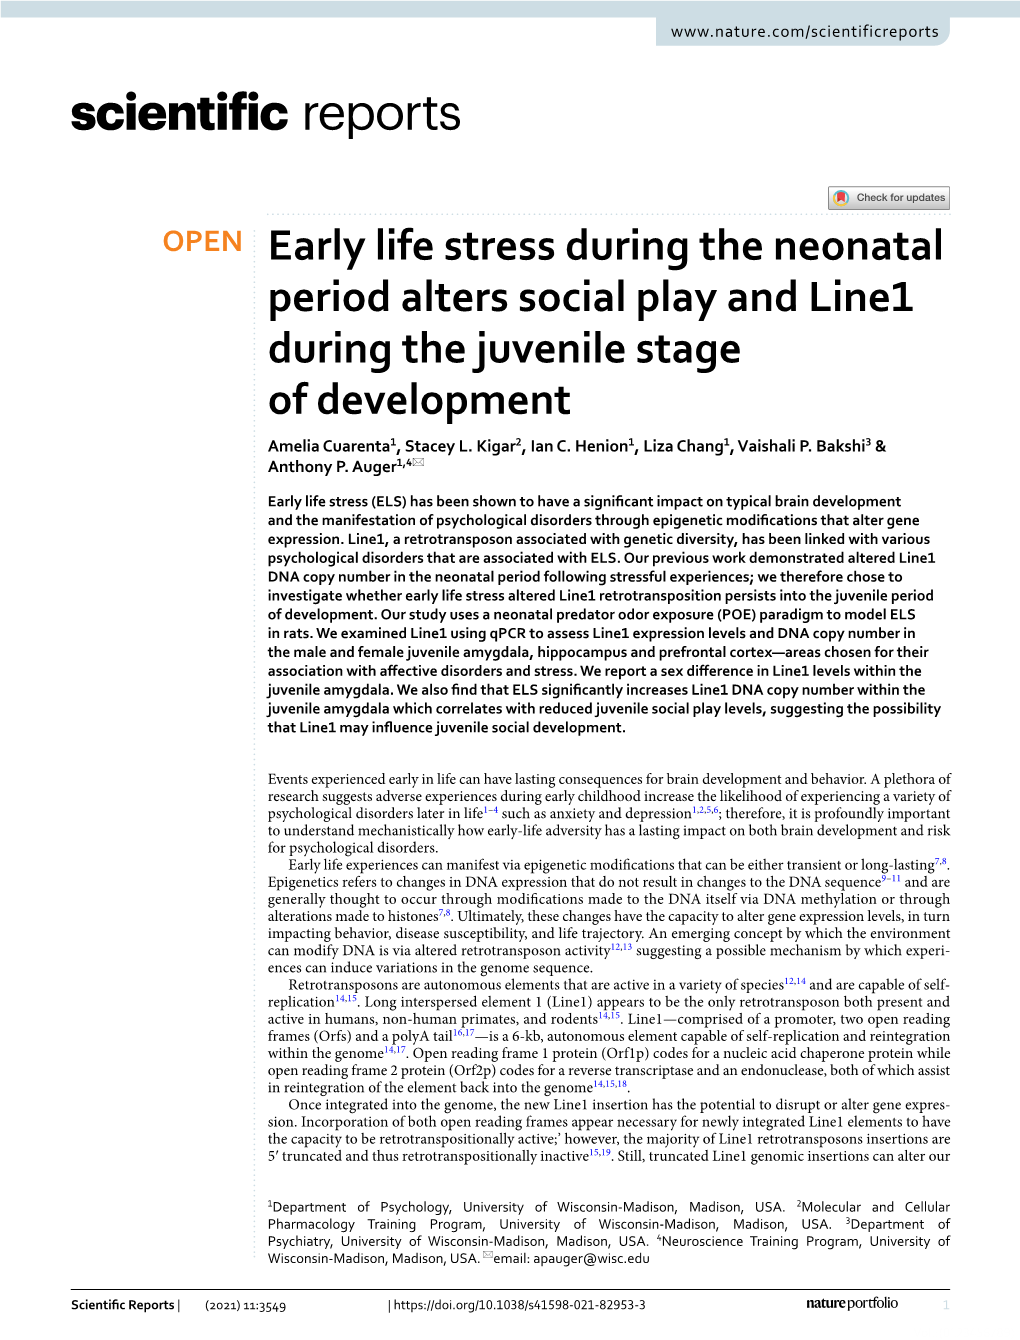 Early Life Stress During the Neonatal Period Alters Social Play and Line1 During the Juvenile Stage of Development Amelia Cuarenta1, Stacey L